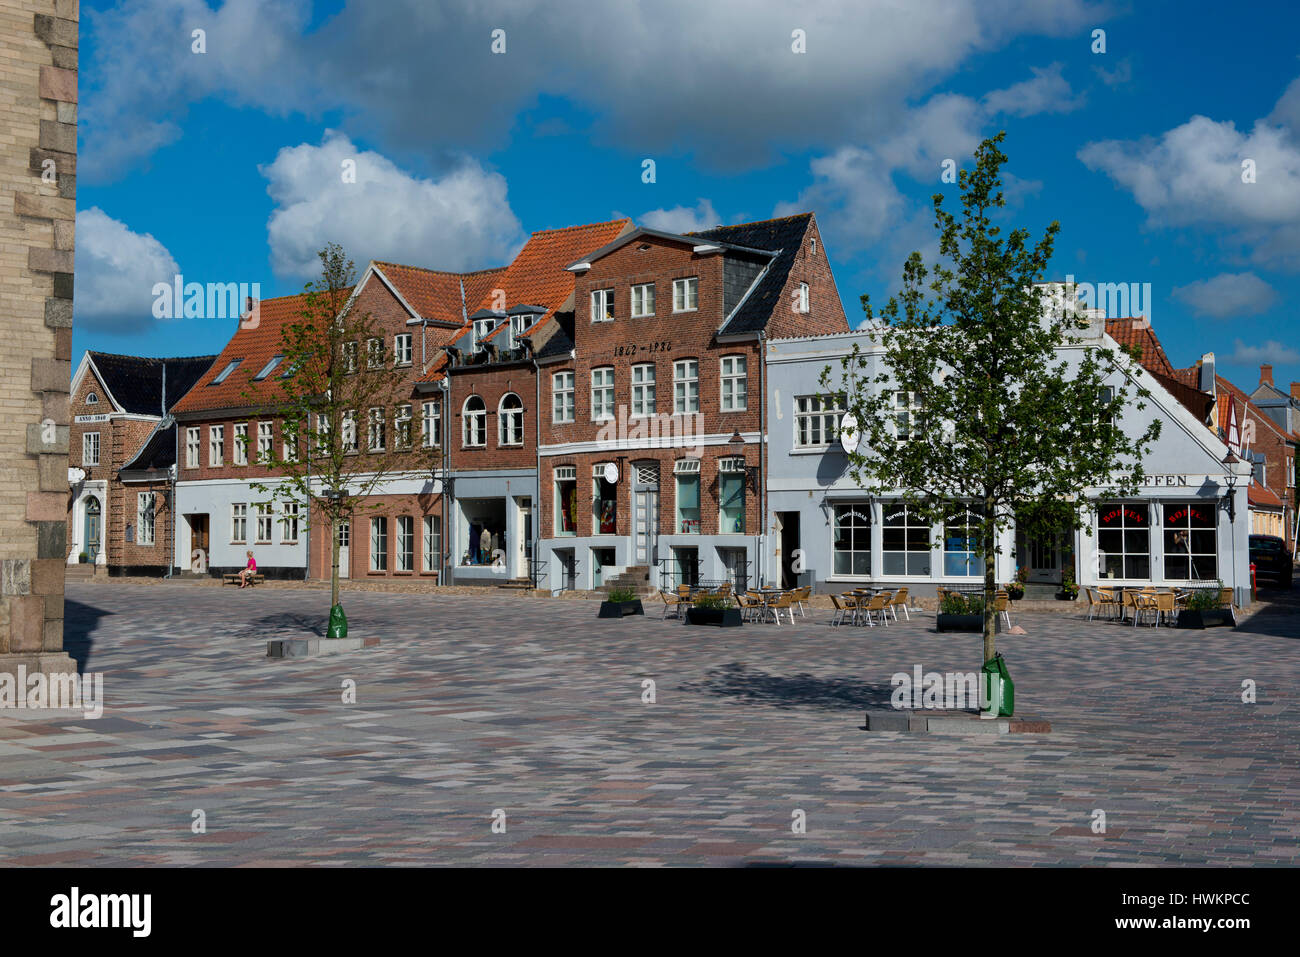 Square of Ribe, medieval town, ancient capital of Denmark Stock Photo